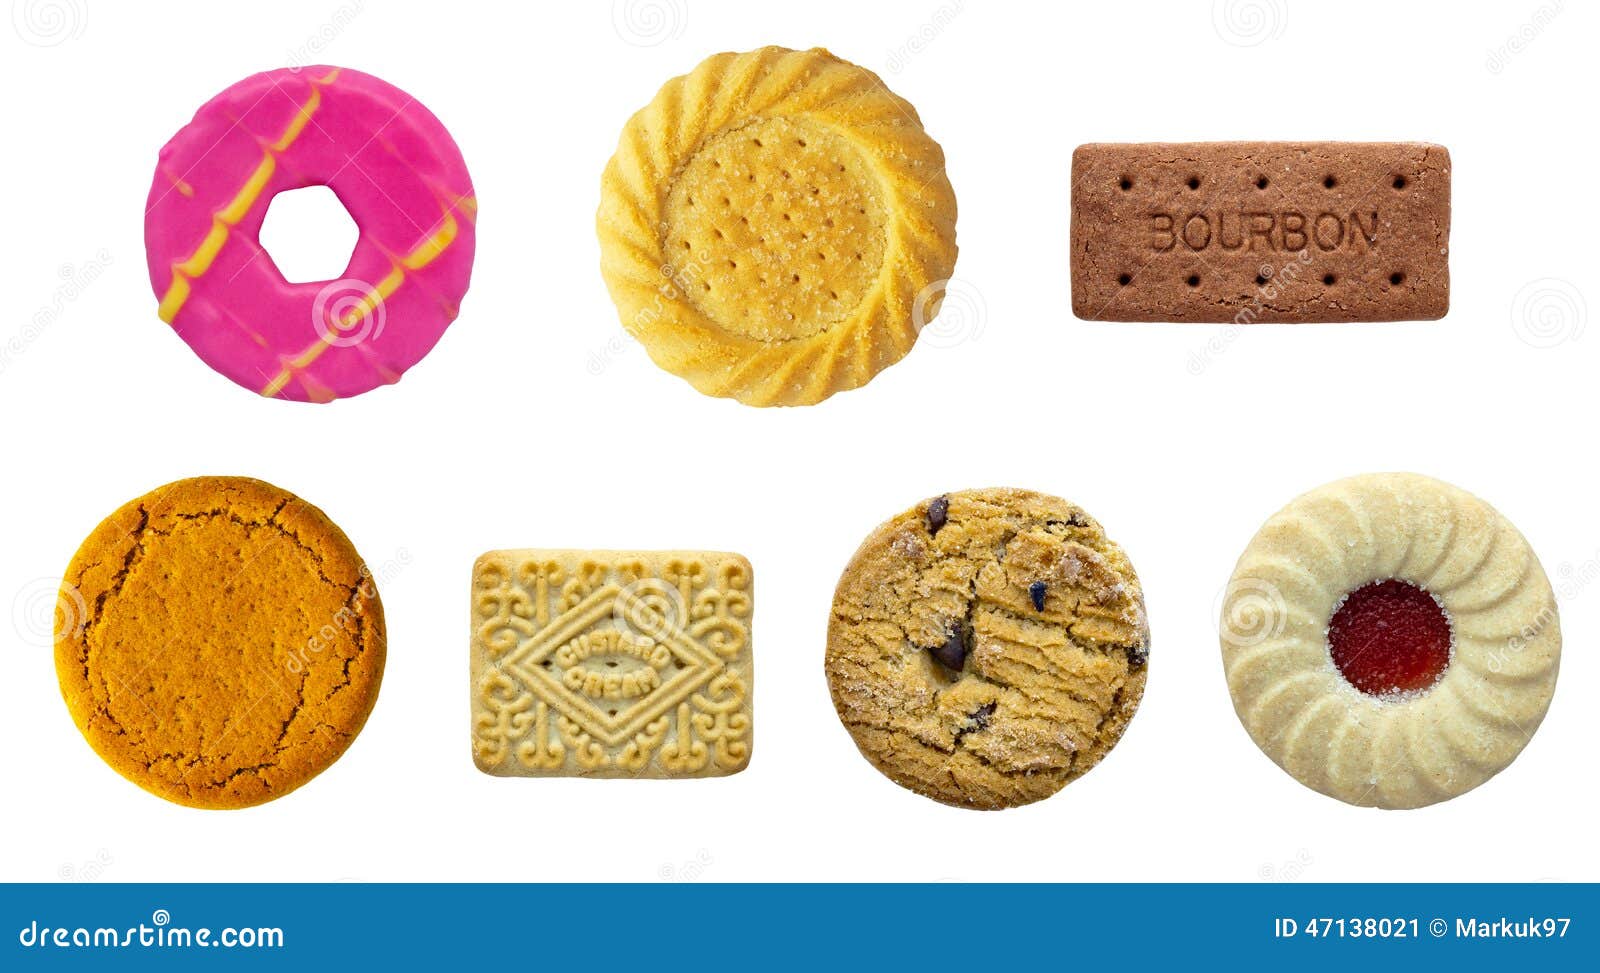 biscuit selection